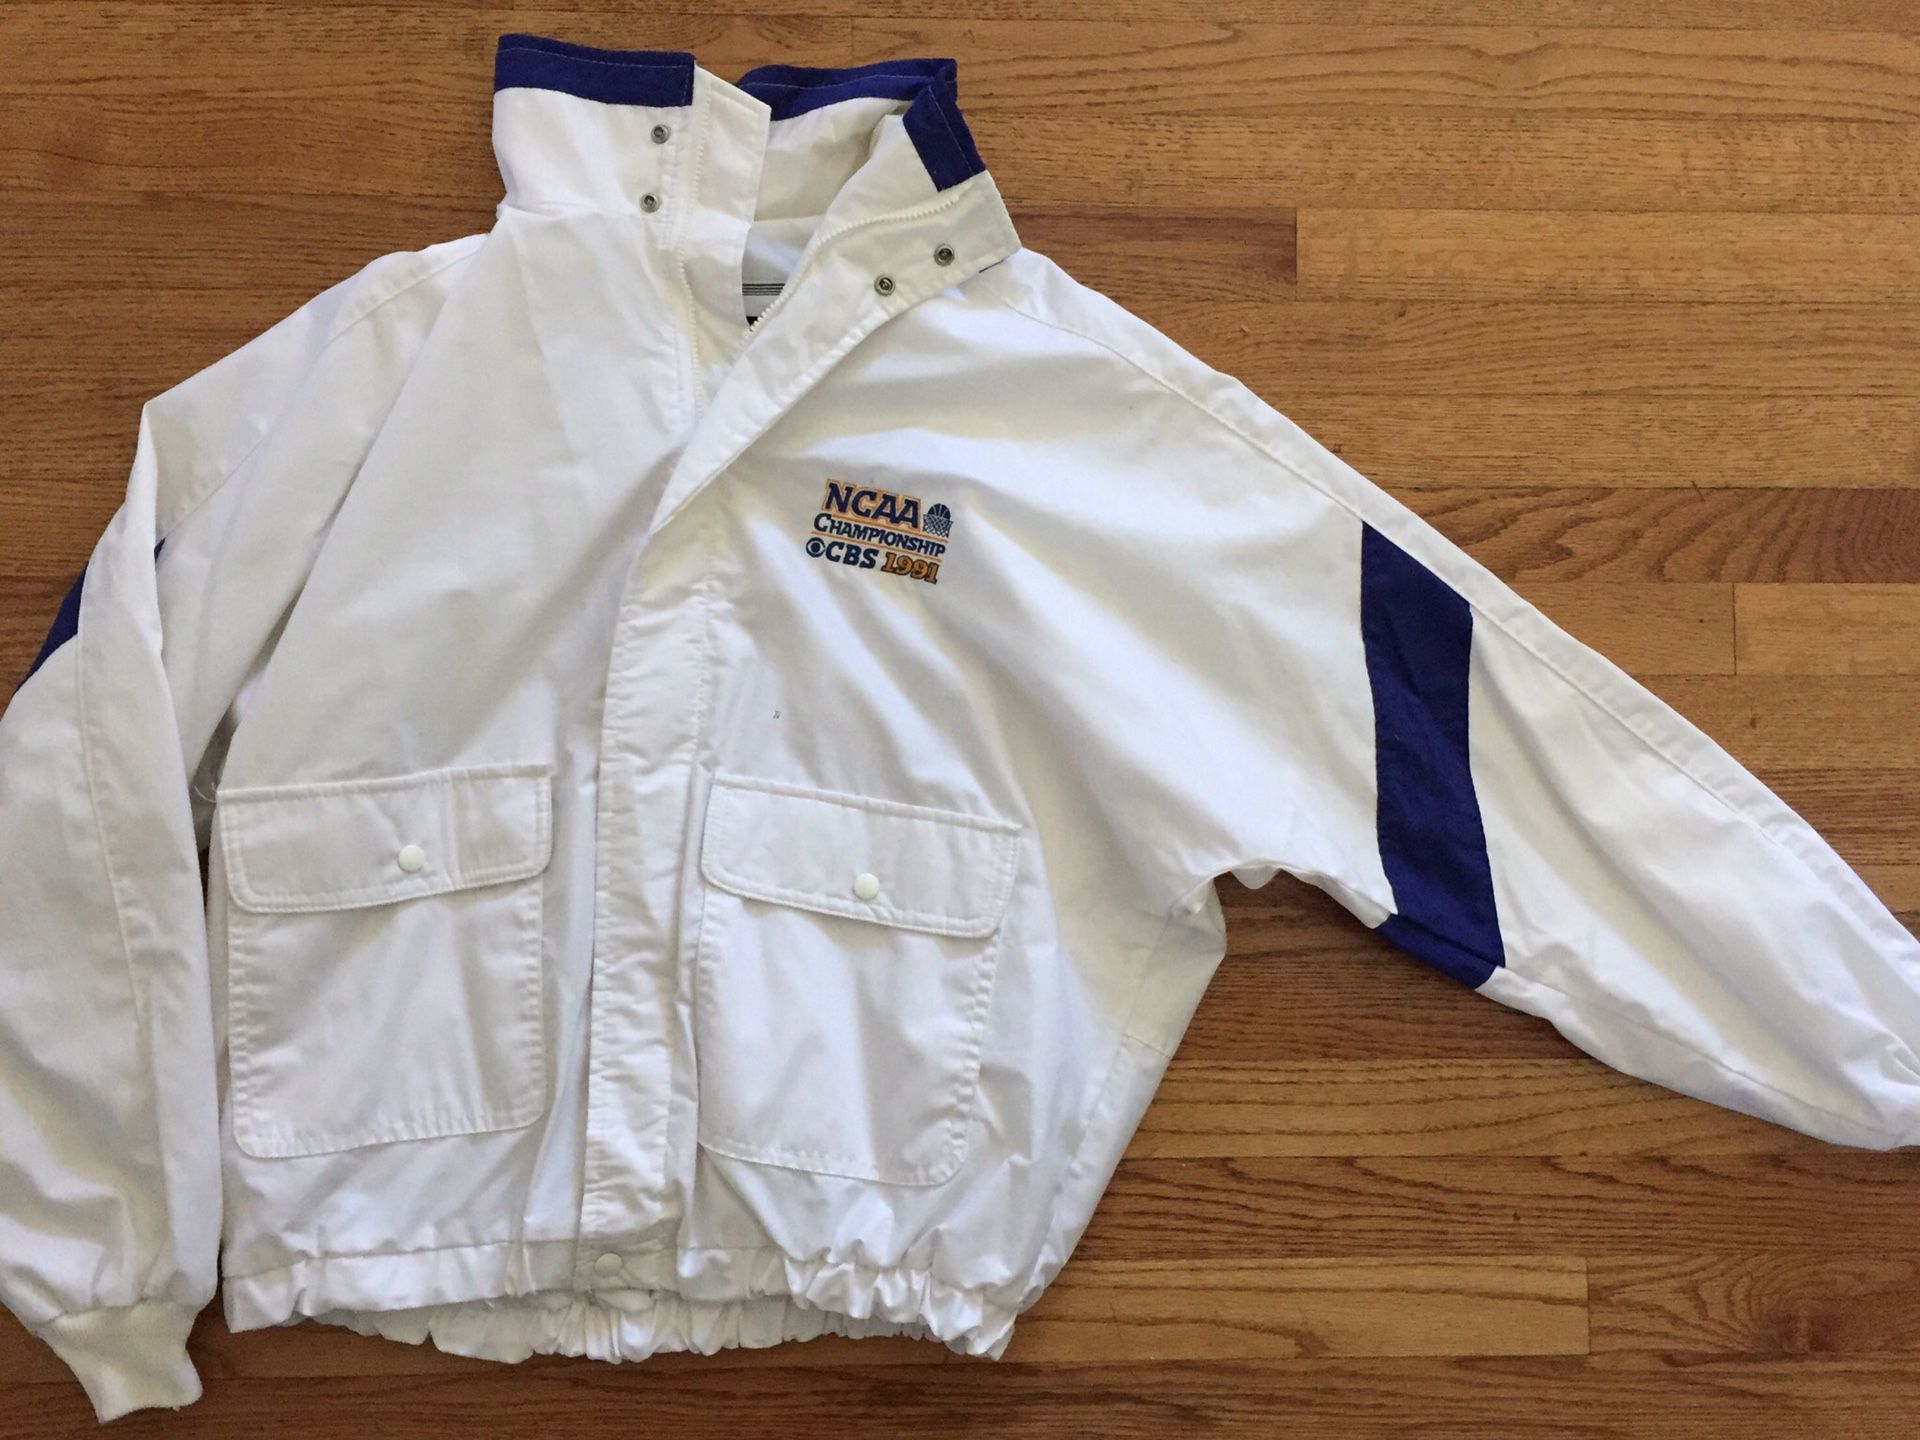 1991 NCAA championship basketball jacket men’s XL - Rare for Sale in ...